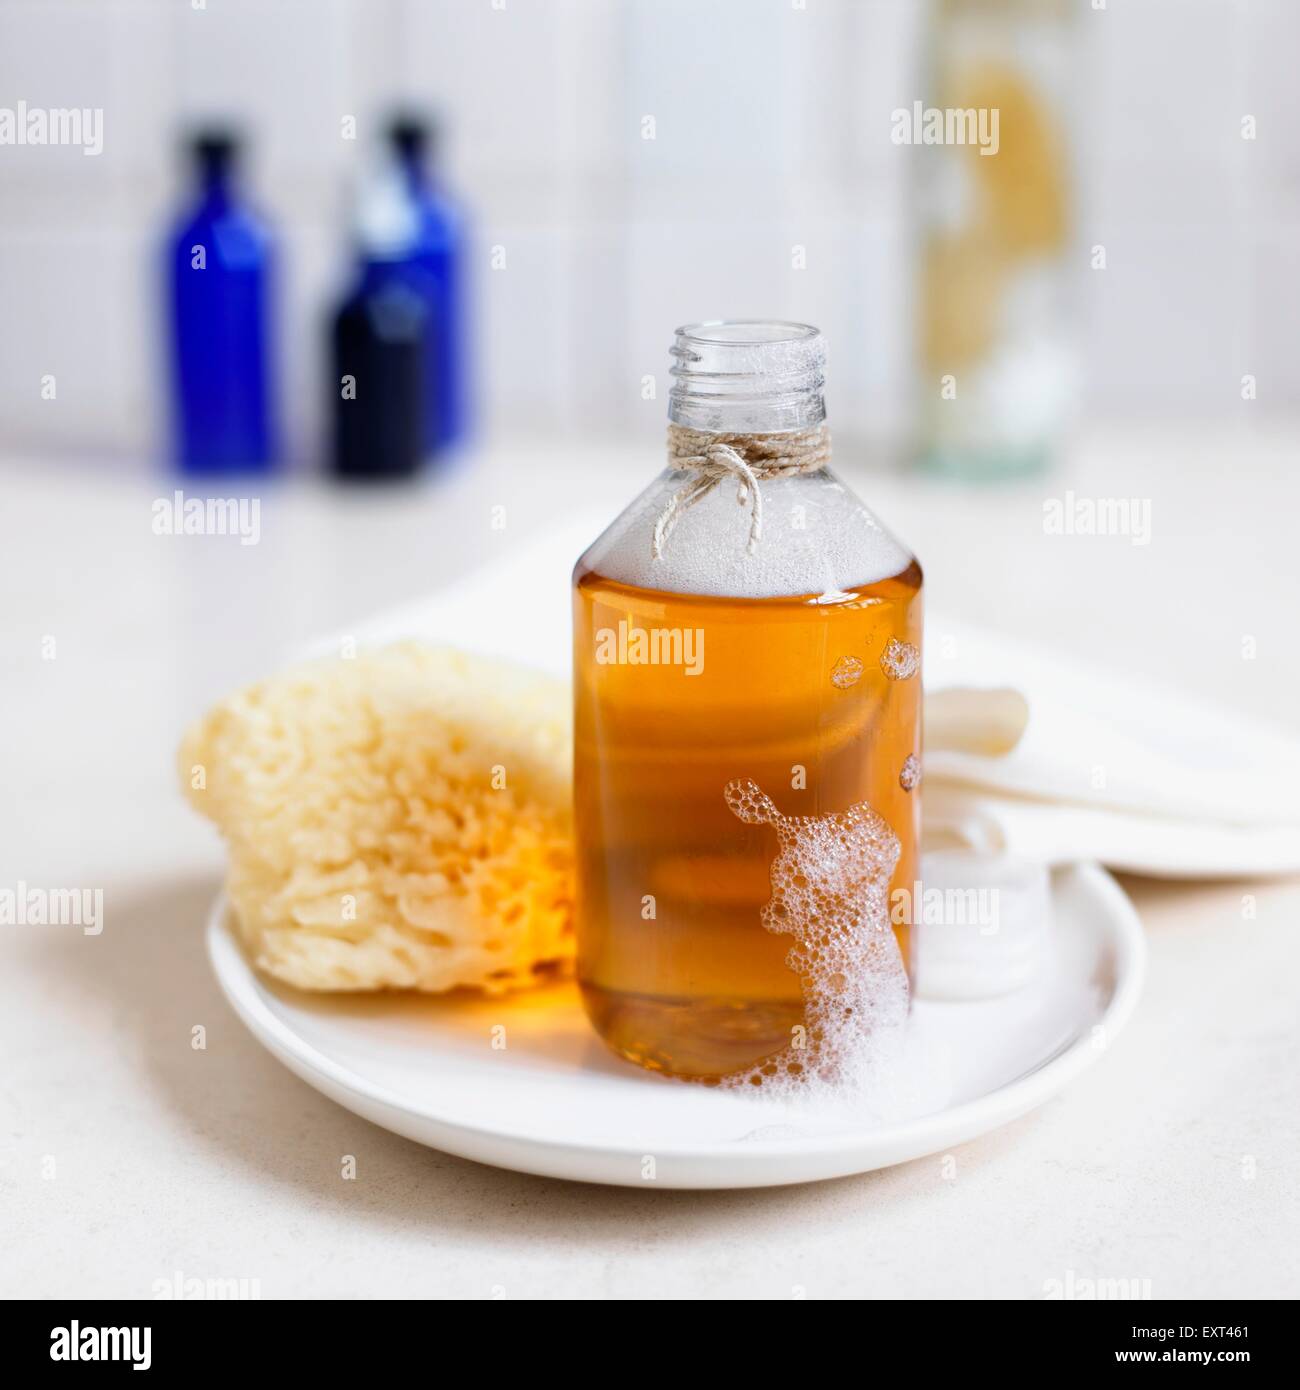 Bottle of hair tonic containing dried comfrey, calendula and horsetail, on a plate, with a sponge Stock Photo